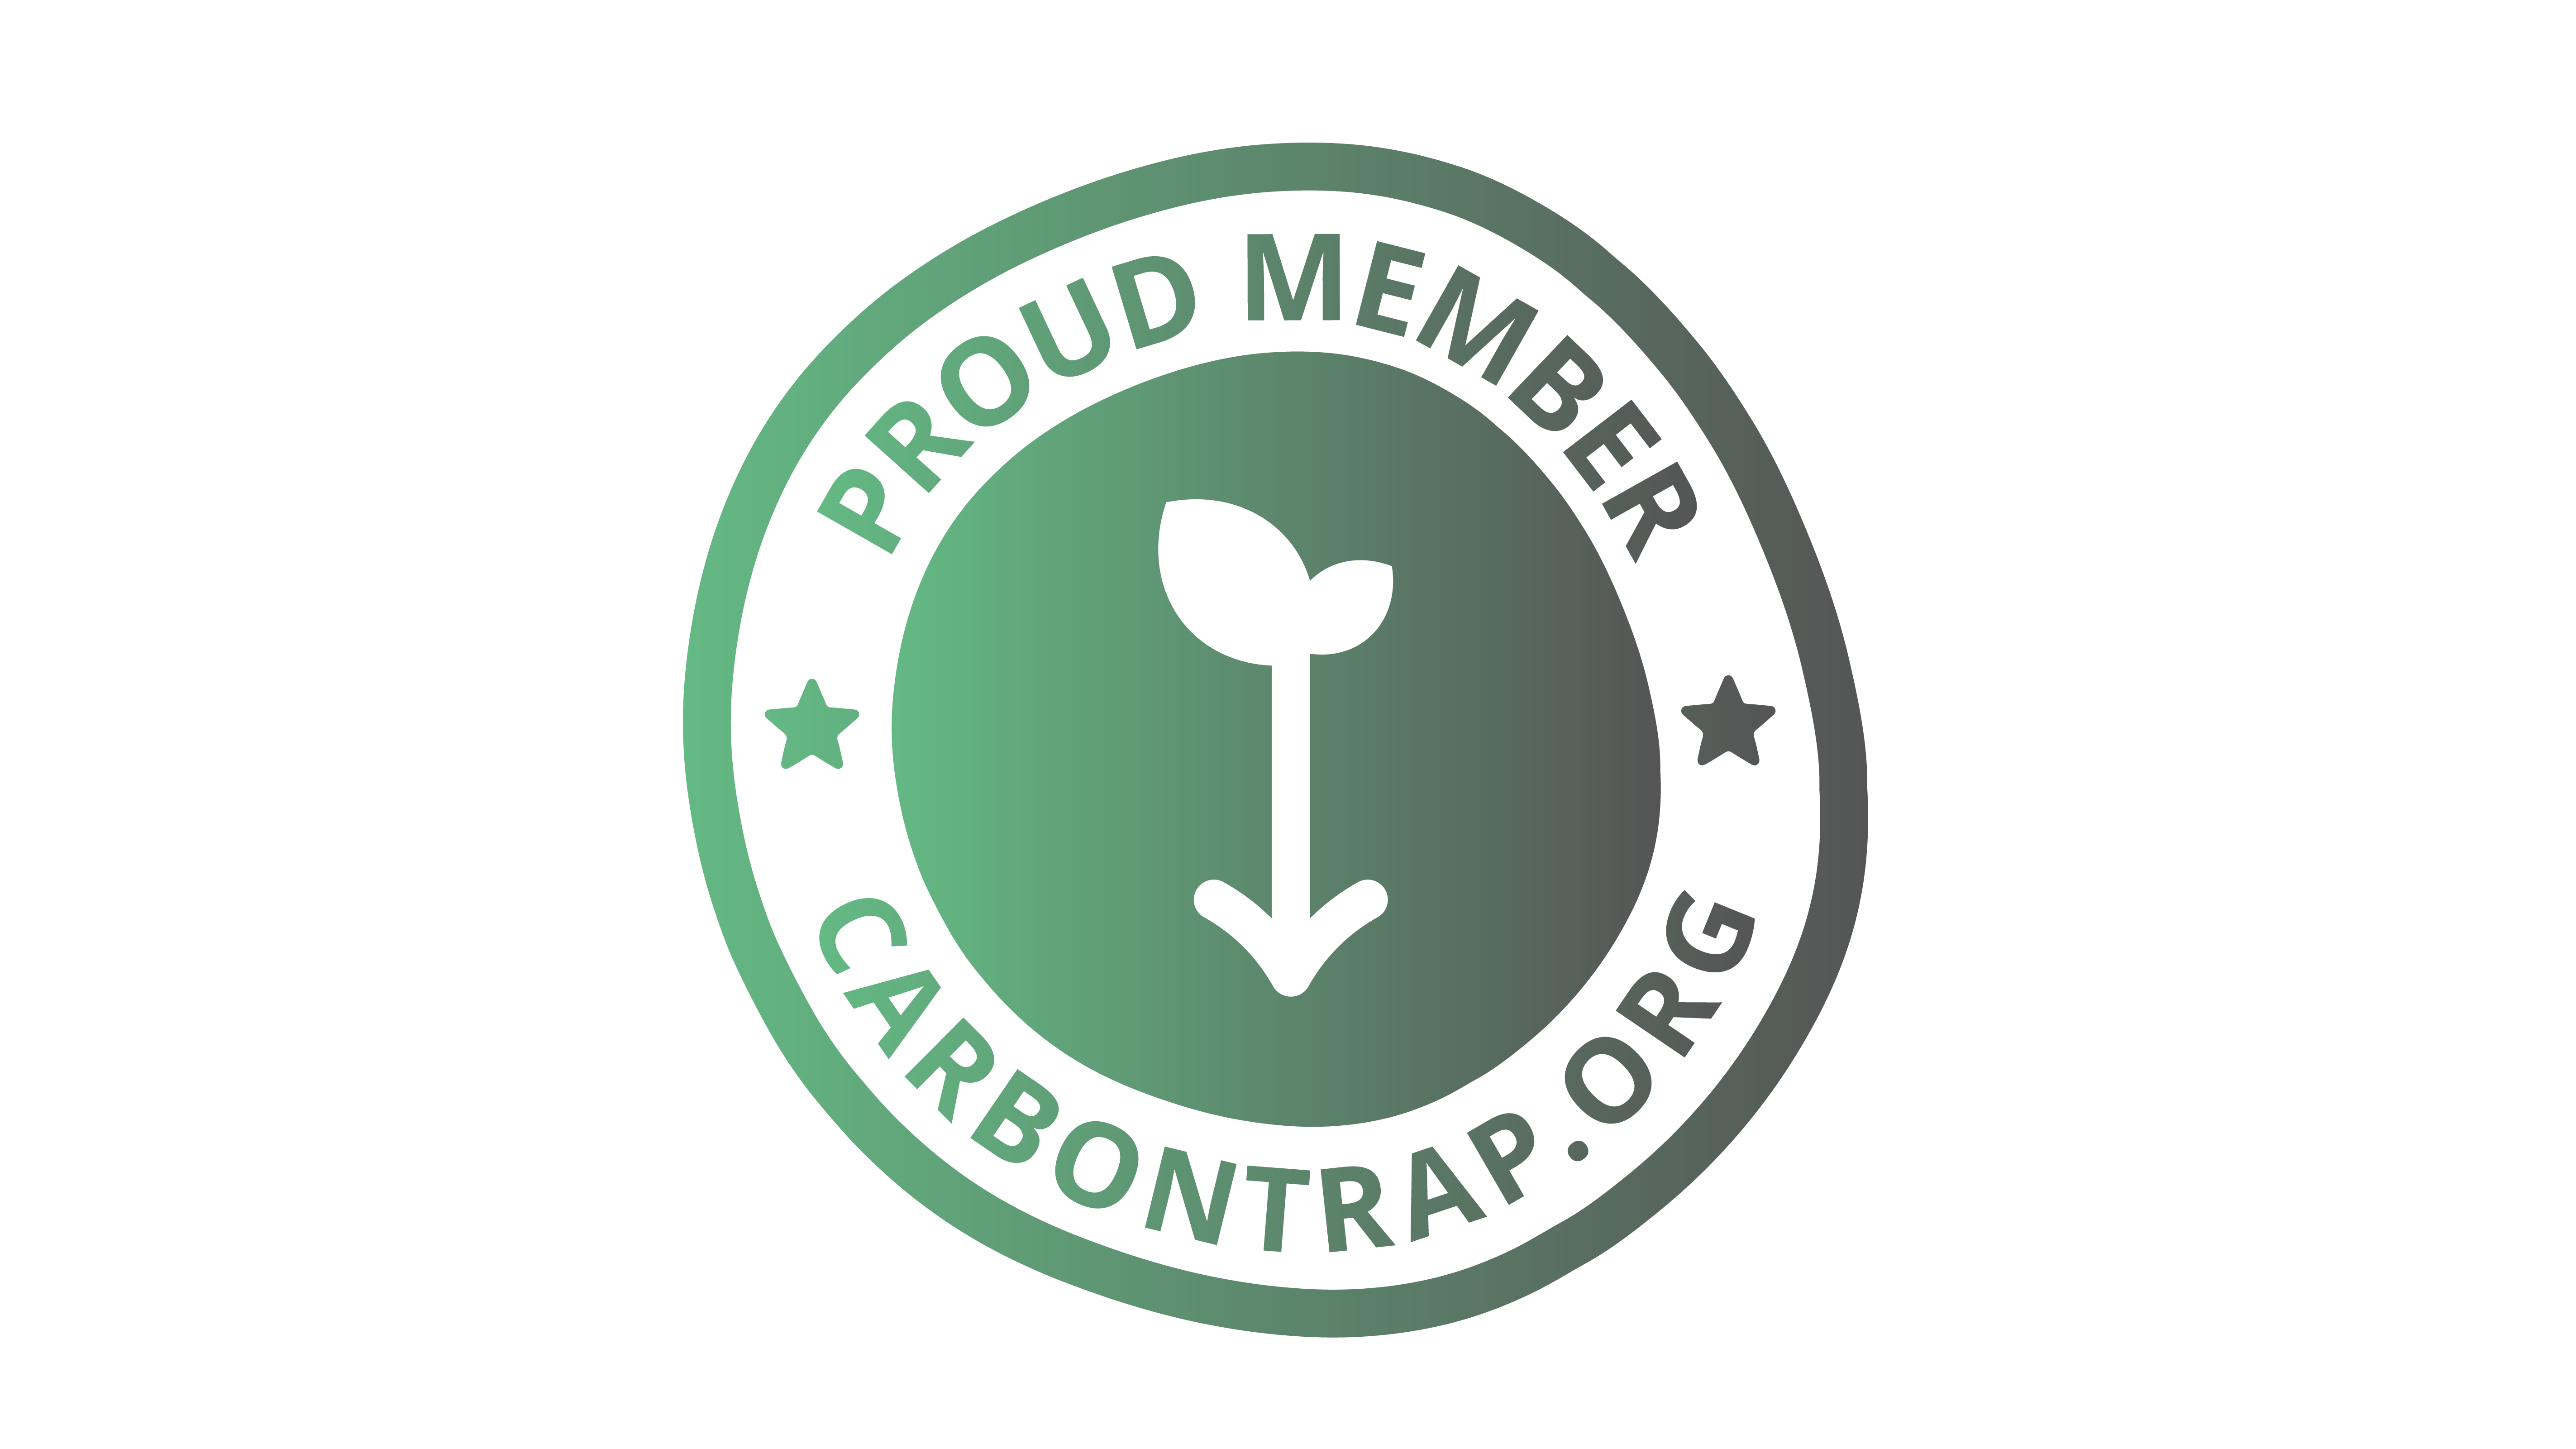 The member logo for Carbon Trap